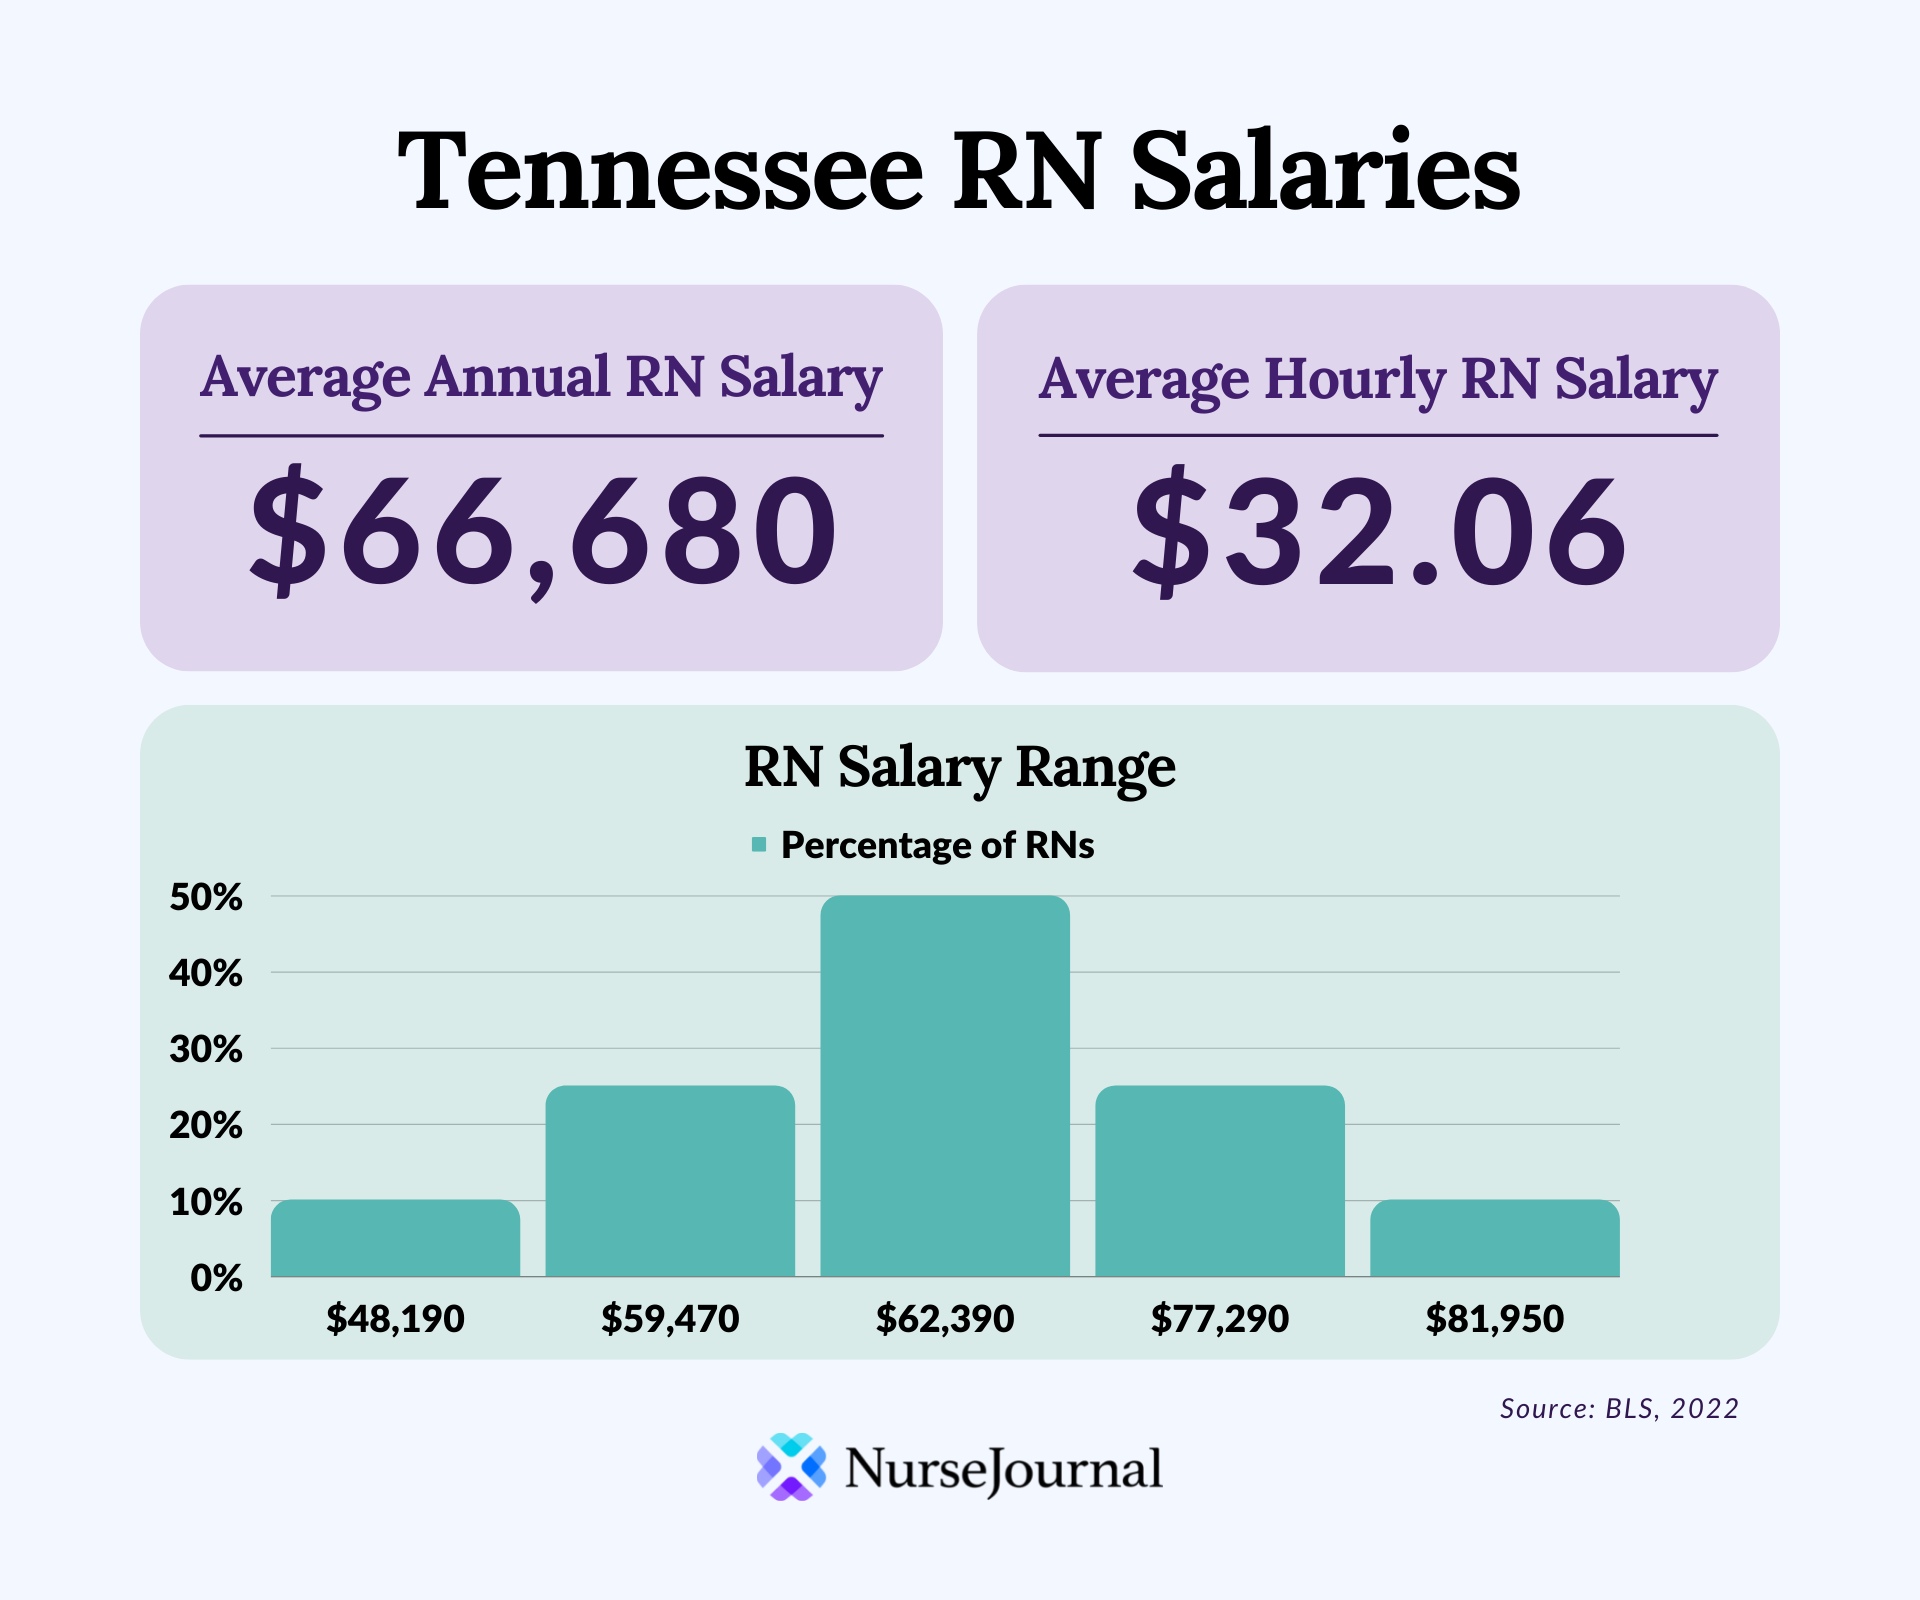 Infographic of registered nursing salary data in Tennessee. The average annual RN salary is $66,680. The average hourly RN salary is $32.06. Average RN salaries range from $48,190 among the bottom 10th percentile of earners to $81,950 among the top 90th percentile of earners.